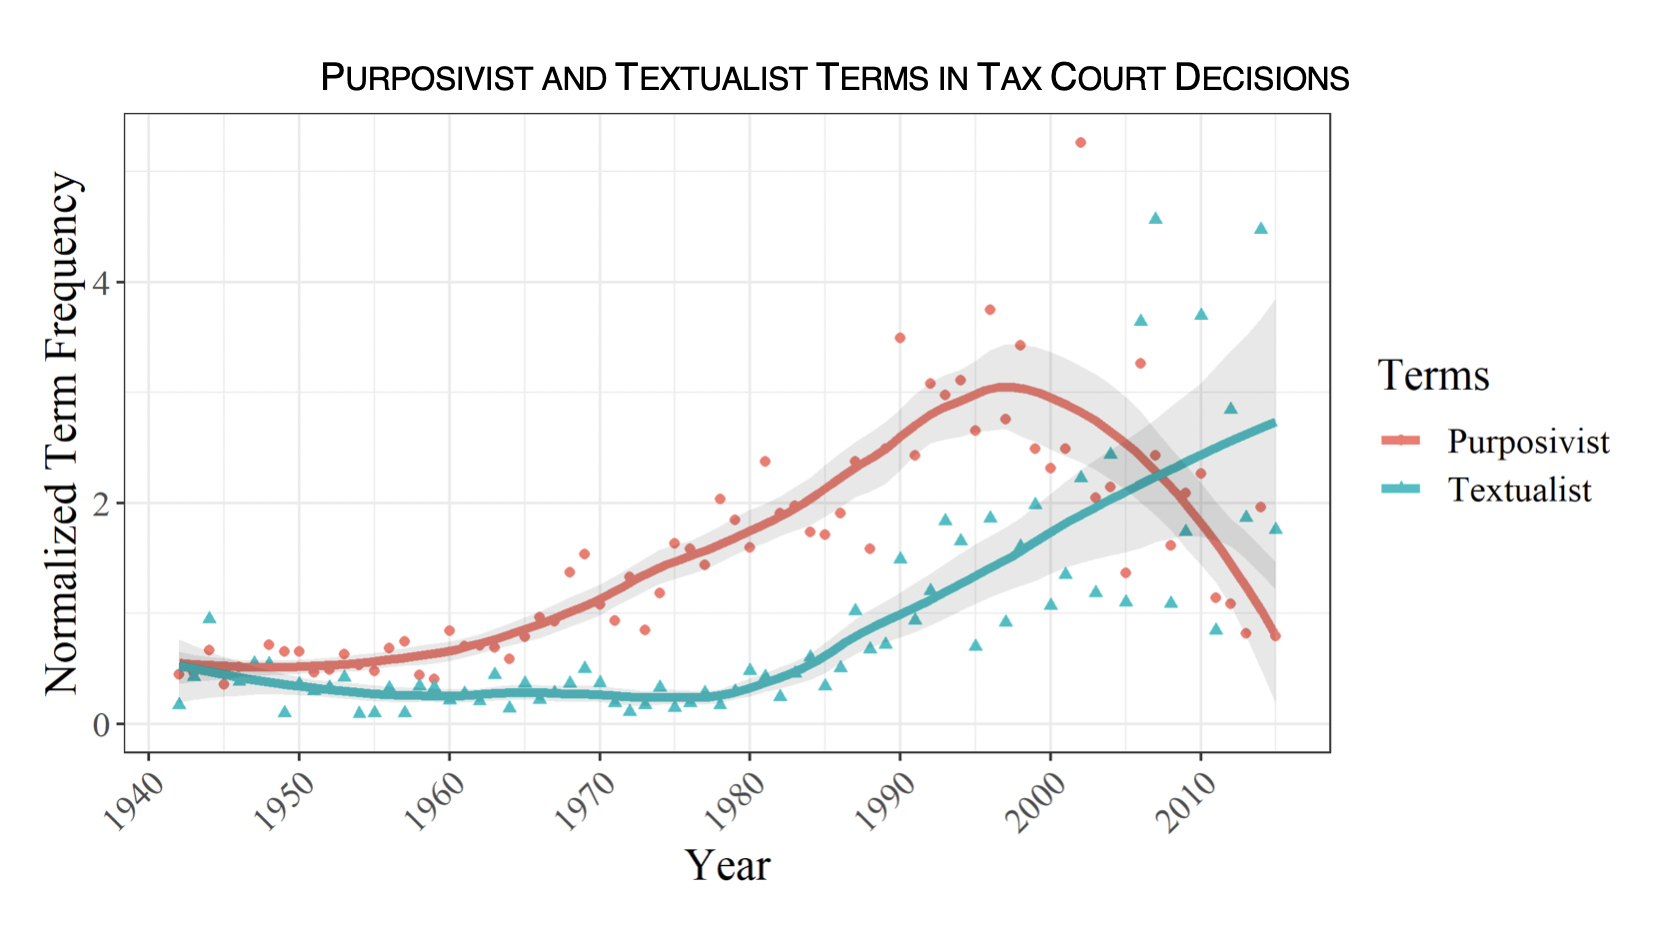 Graph showing "Purposivist and Textualist Terms in Tax Court Decisions" and the relationshp between year and Normalized Term Frequency.